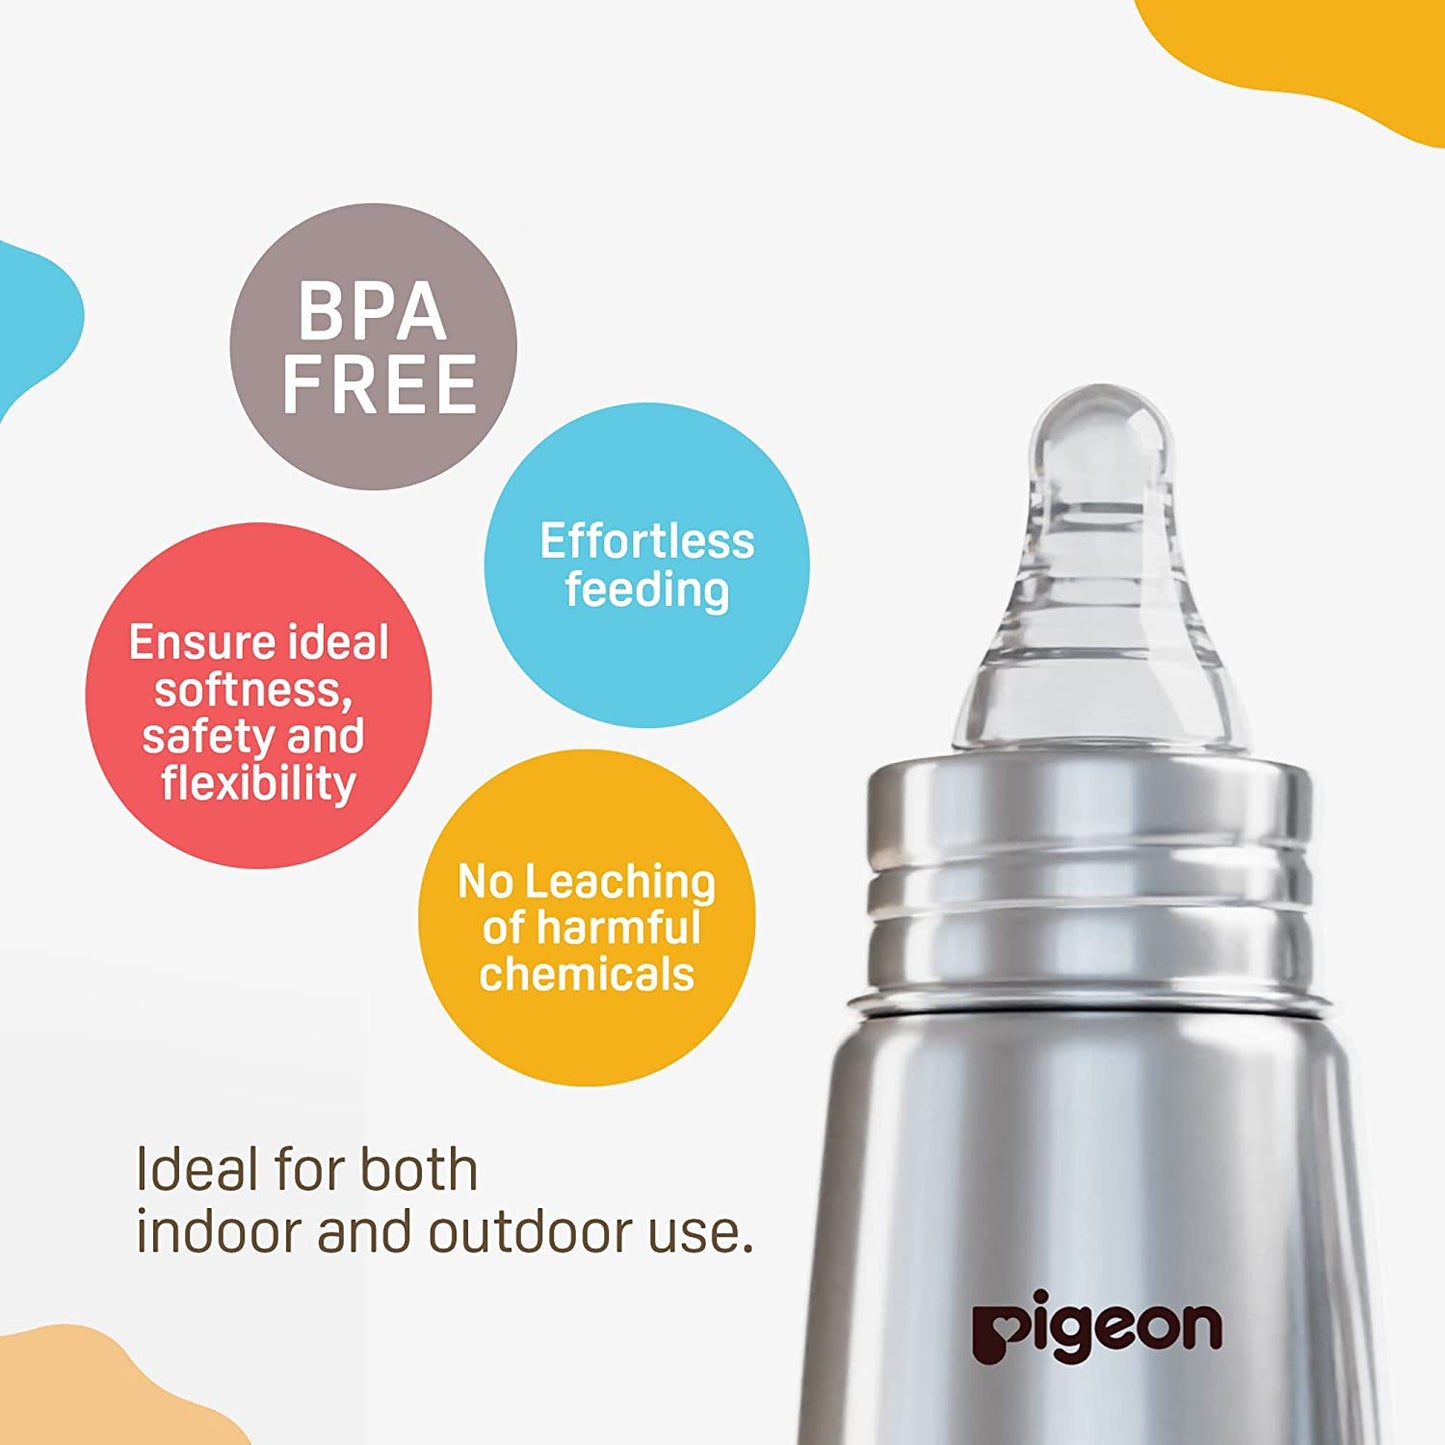 Pigeon Stainless Steel Feeding Baby Bottle (150ml) - Size M